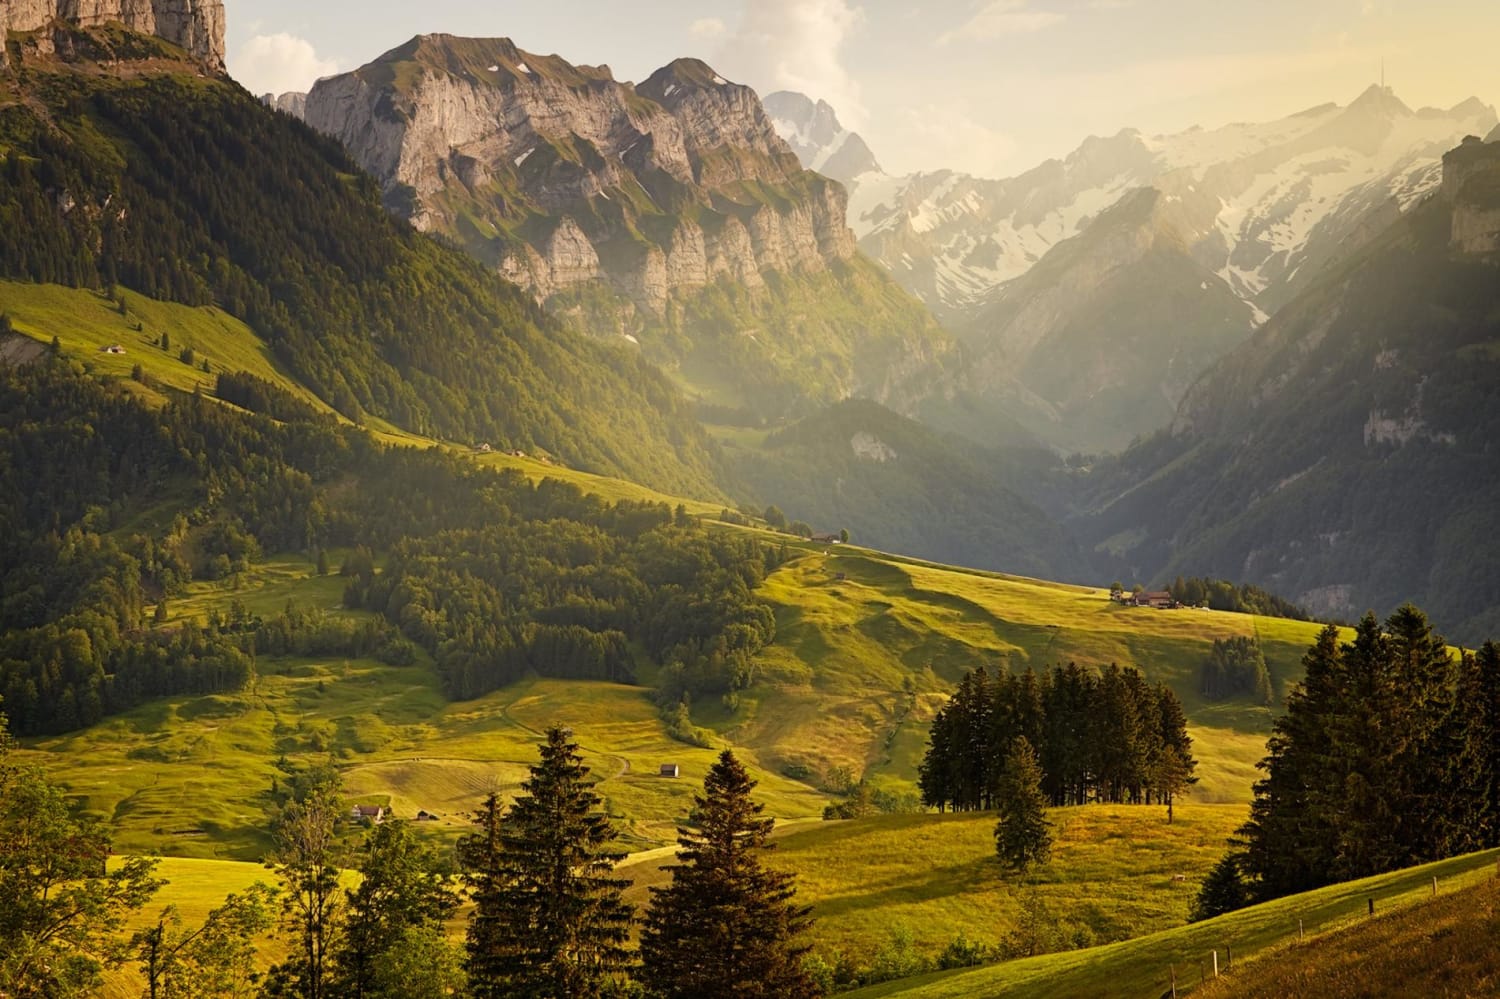 Majestic Mountain Views From Around the World